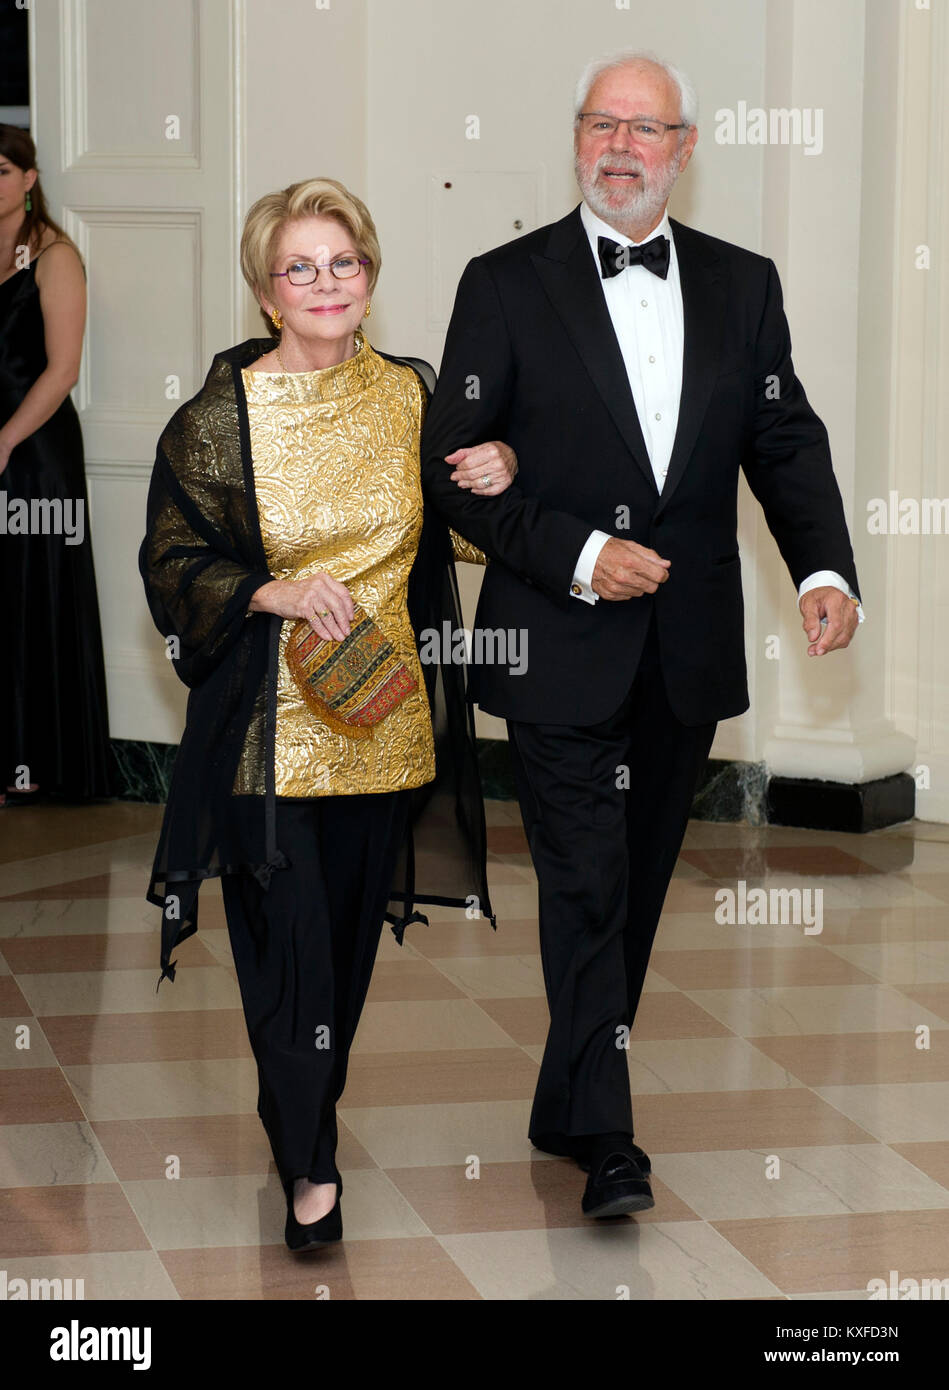 Carol Pensky and David Pensky arrive for the Official Dinner in honor of Prime Minister David Cameron of Great Britain and his wife, Samantha, at the White House in Washington, D.C. on Tuesday, March 14, 2012.  Ms. Pensky is one of United States President Barack Obama's biggest campaign fundraisers..Credit: Ron Sachs / CNP./ MediaPunch (RESTRICTION: NO New York or New Jersey Newspapers or newspapers within a 75 mile radius of New York City) Stock Photo